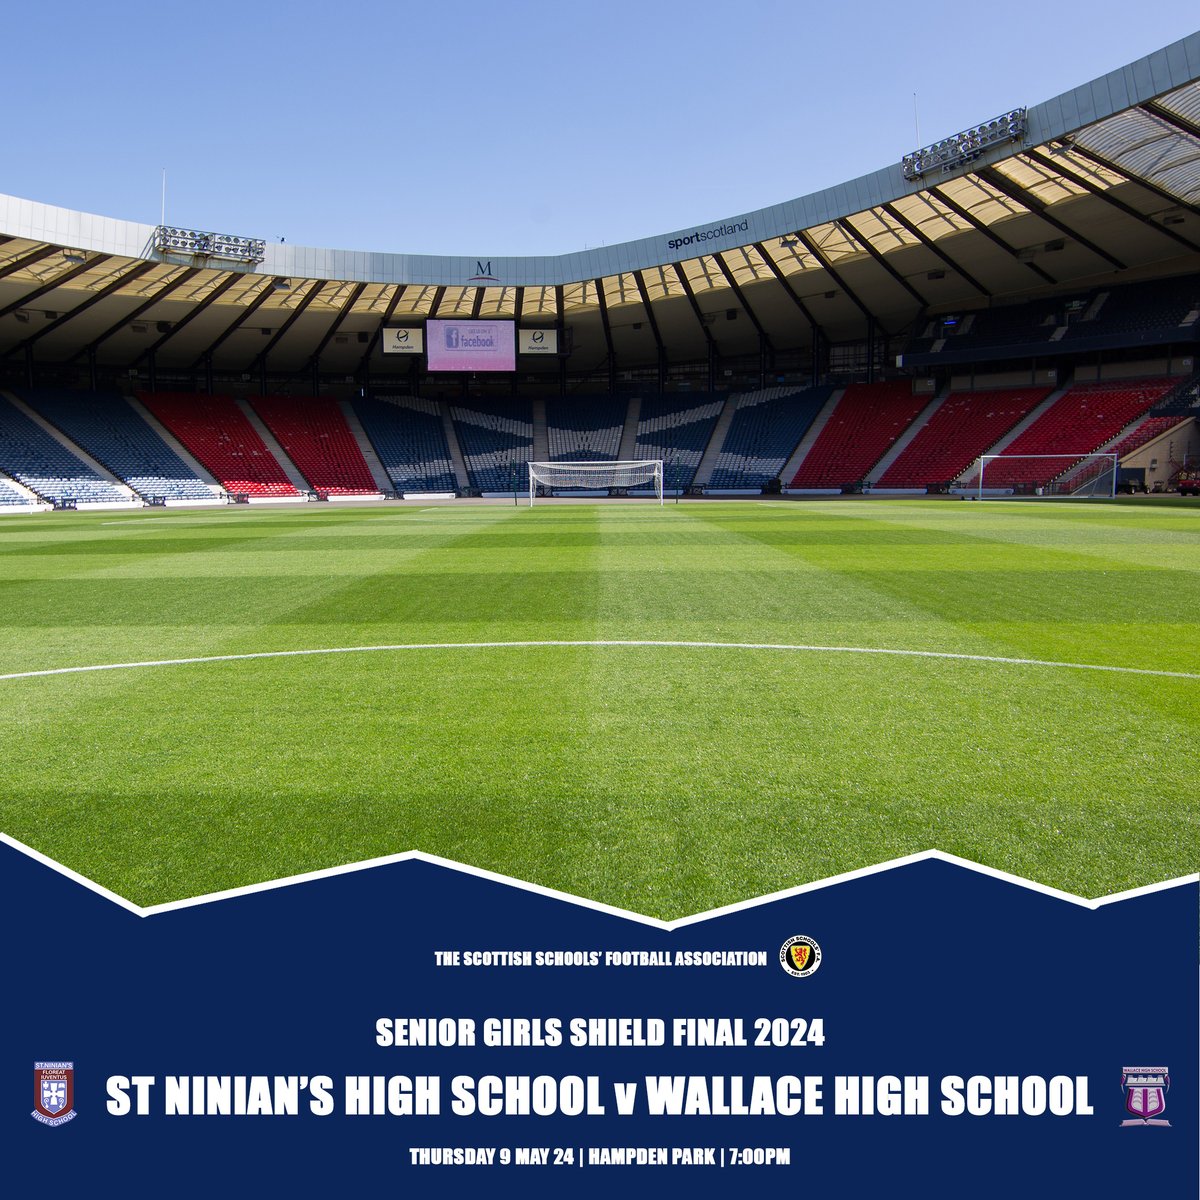 SENIOR GIRLS SHIELD FINAL 24 | Tonight the players from @stninianshigh and @wallacehighsch will make history competing for our Senior Shield at @HampdenPark for the very first time. Why not come along and support the girls at the National Stadium ⬇️